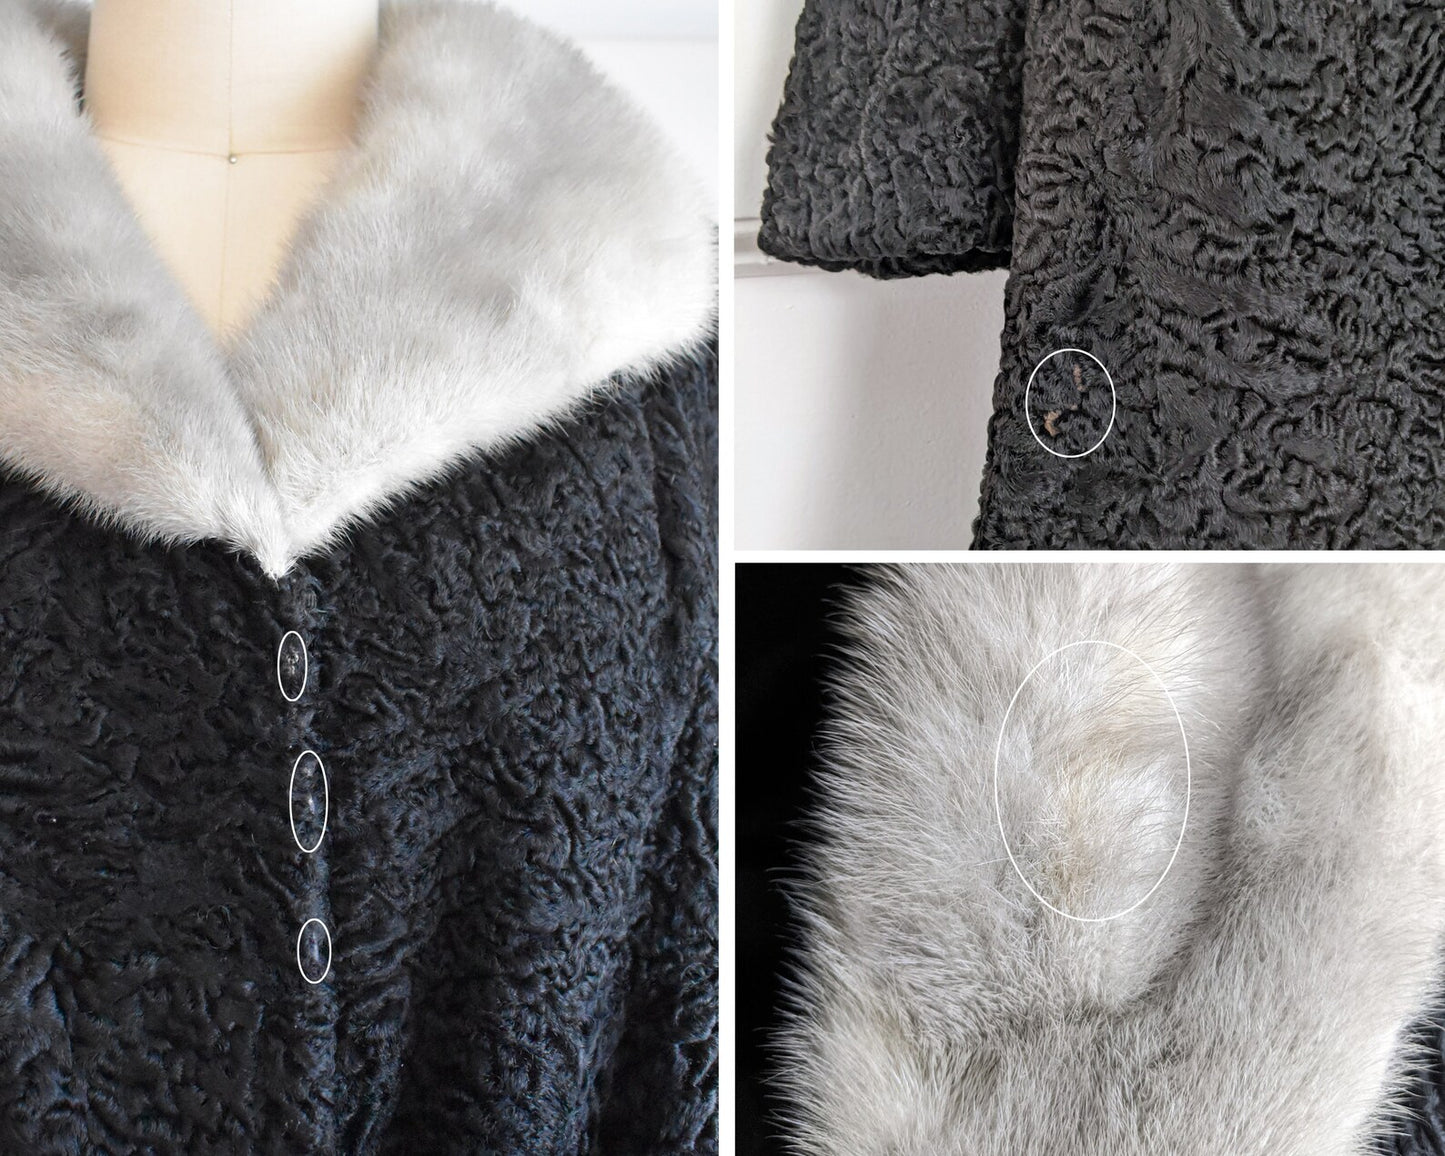 Collage photo of small flaws. The left and top right photo shows some wear to the fur on the coat. The bottom right shows a slight discolored spot to the fur.